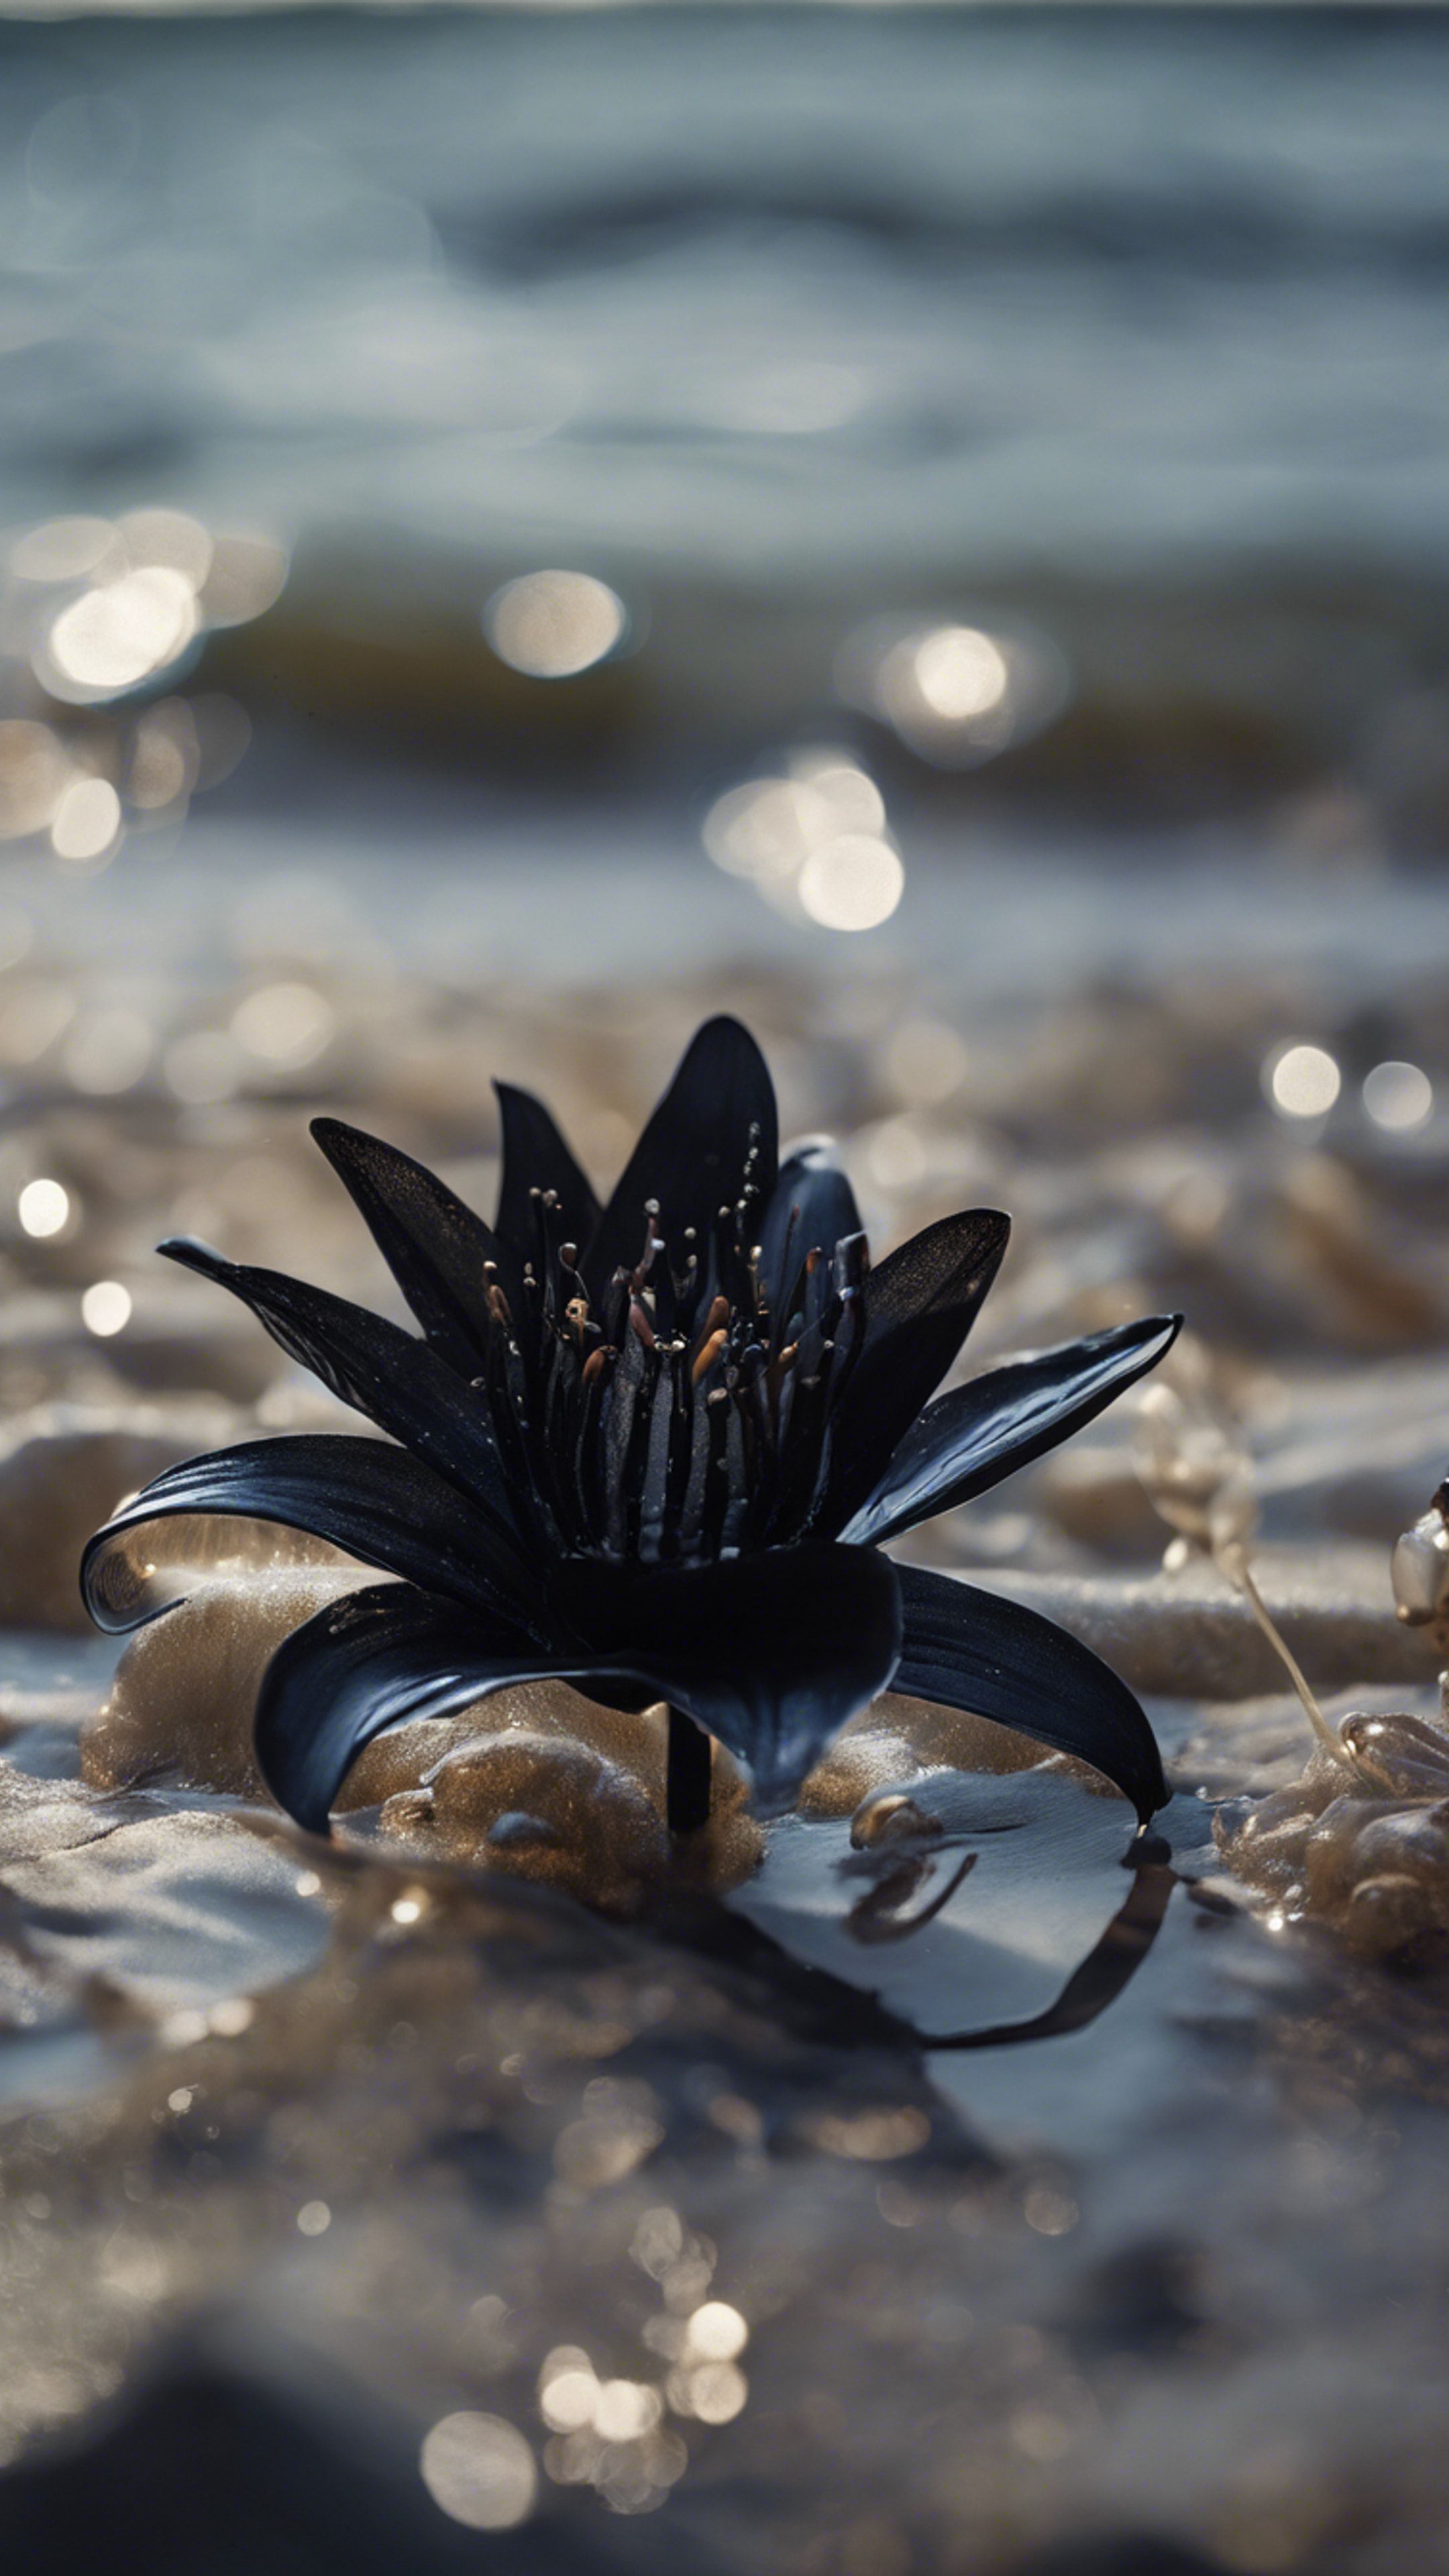 A black lily hiding under the tide, revealed only when the ocean pulls away, revealing the dark secrets of the sea bed. Обои[3833c30c18c941348380]